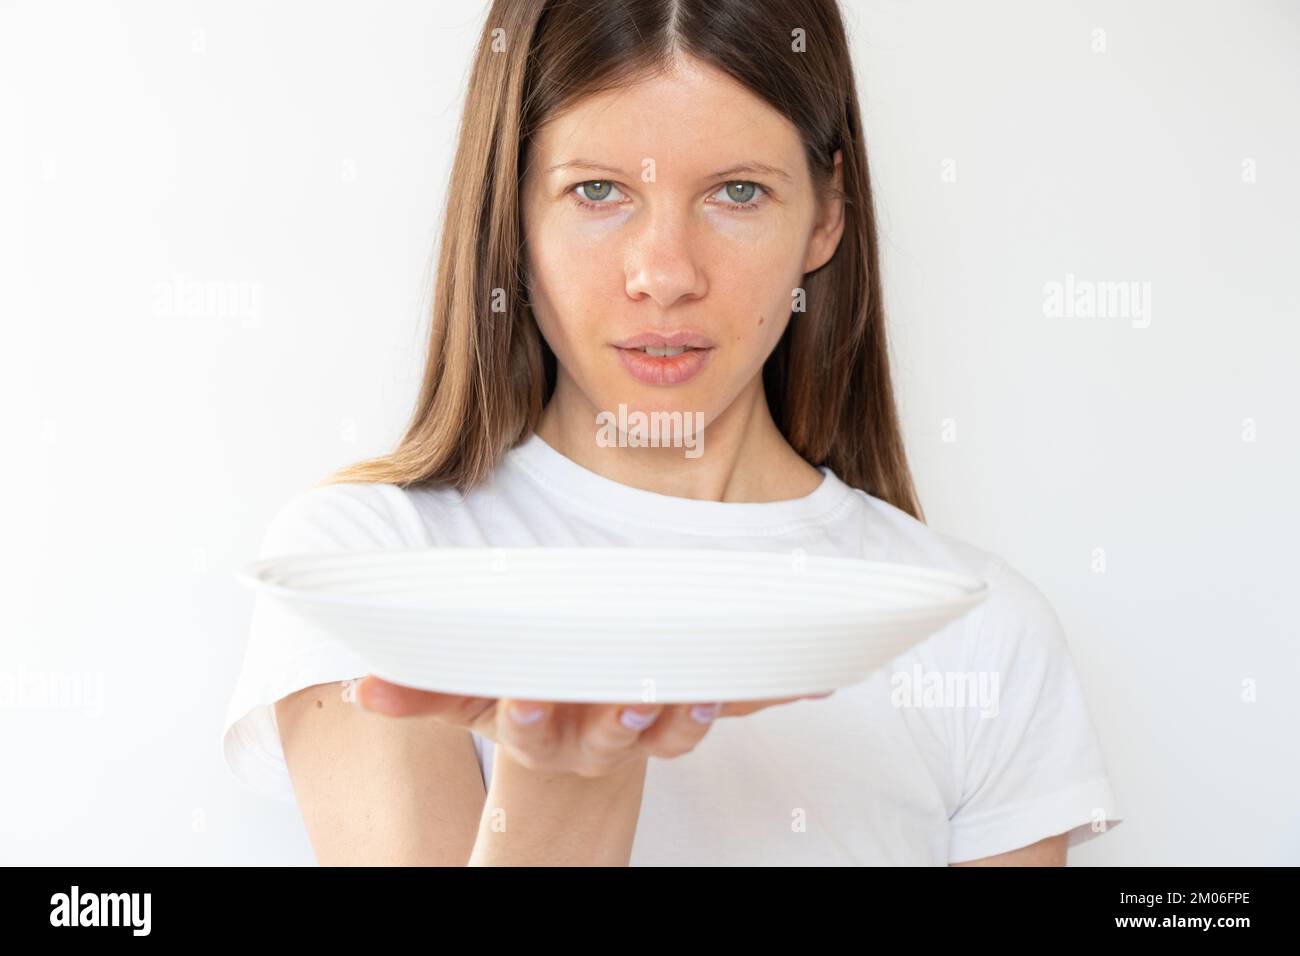 The girl is holding an empty white plate on a white background, the waiter with a plate Stock Photo